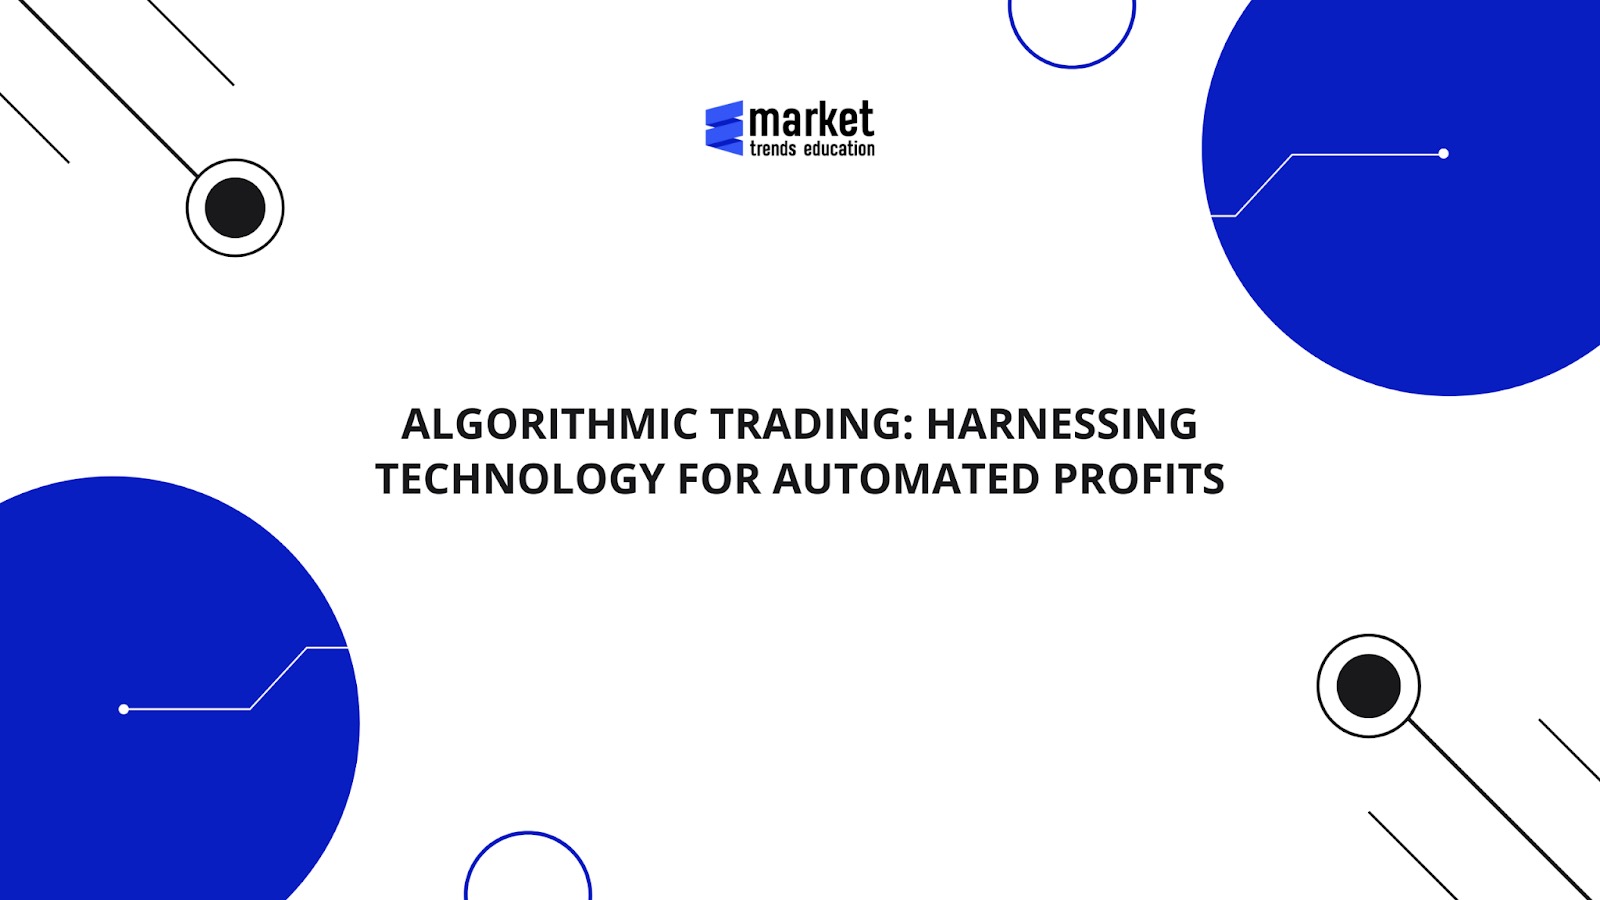 Algorithmic Trading: Harnessing Technology for Automated Profits